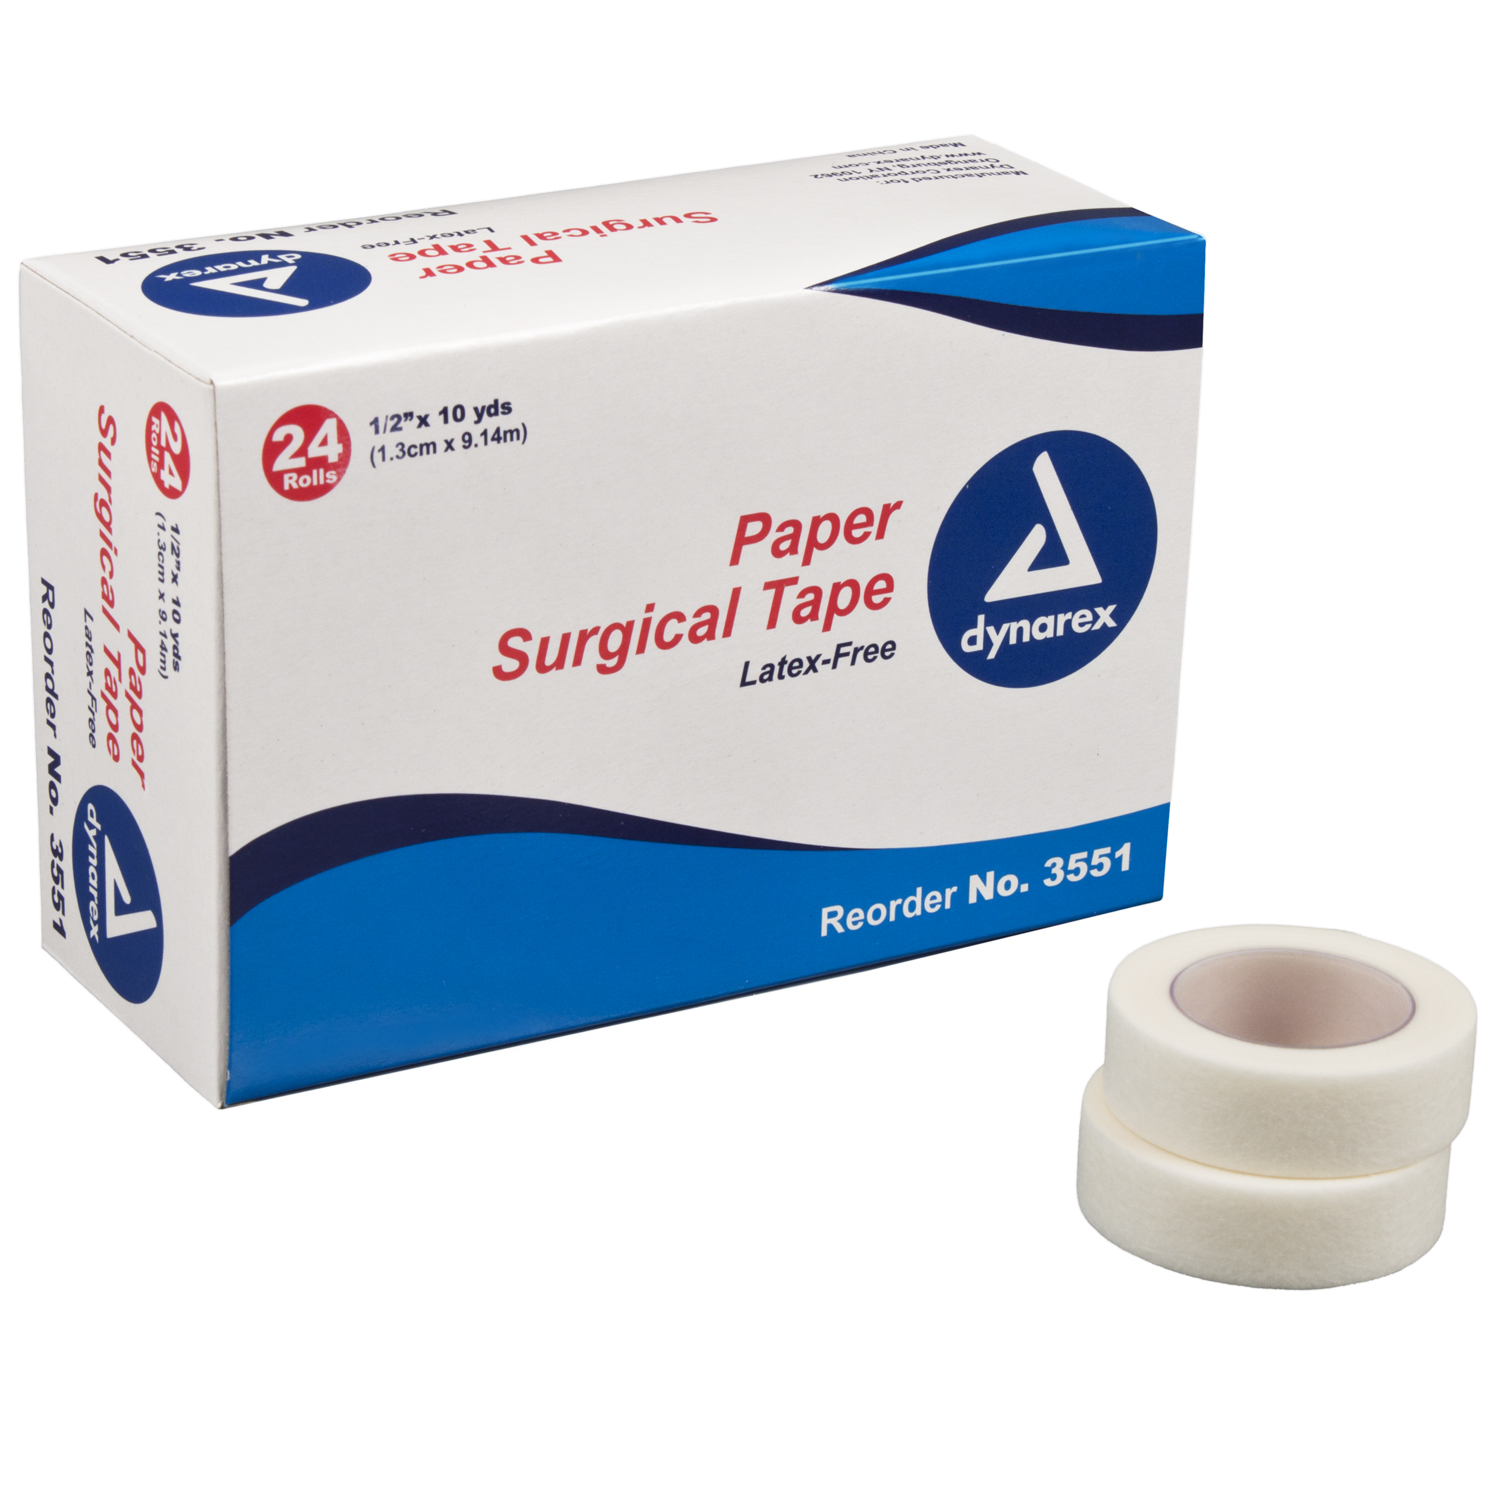 0.5 Inch Paper Surgical Tape: Box of 24